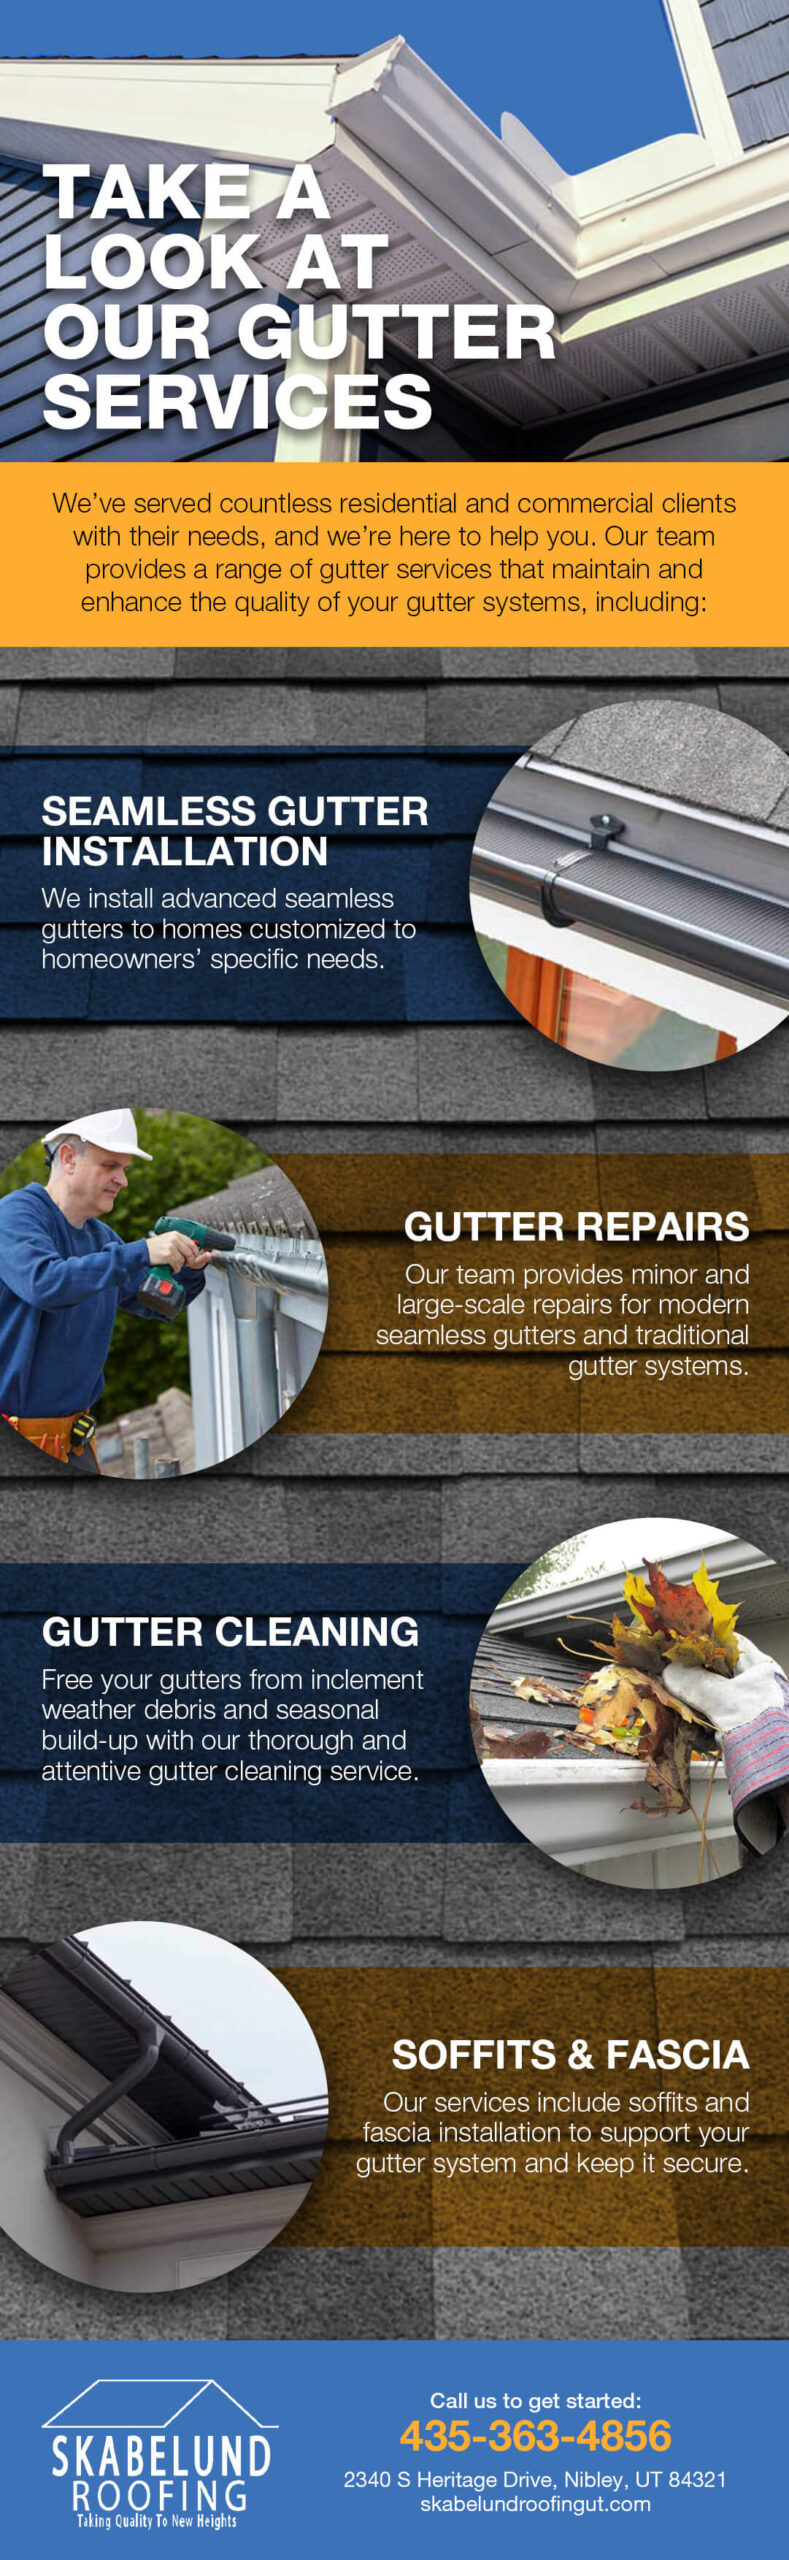 Gutter services infographic